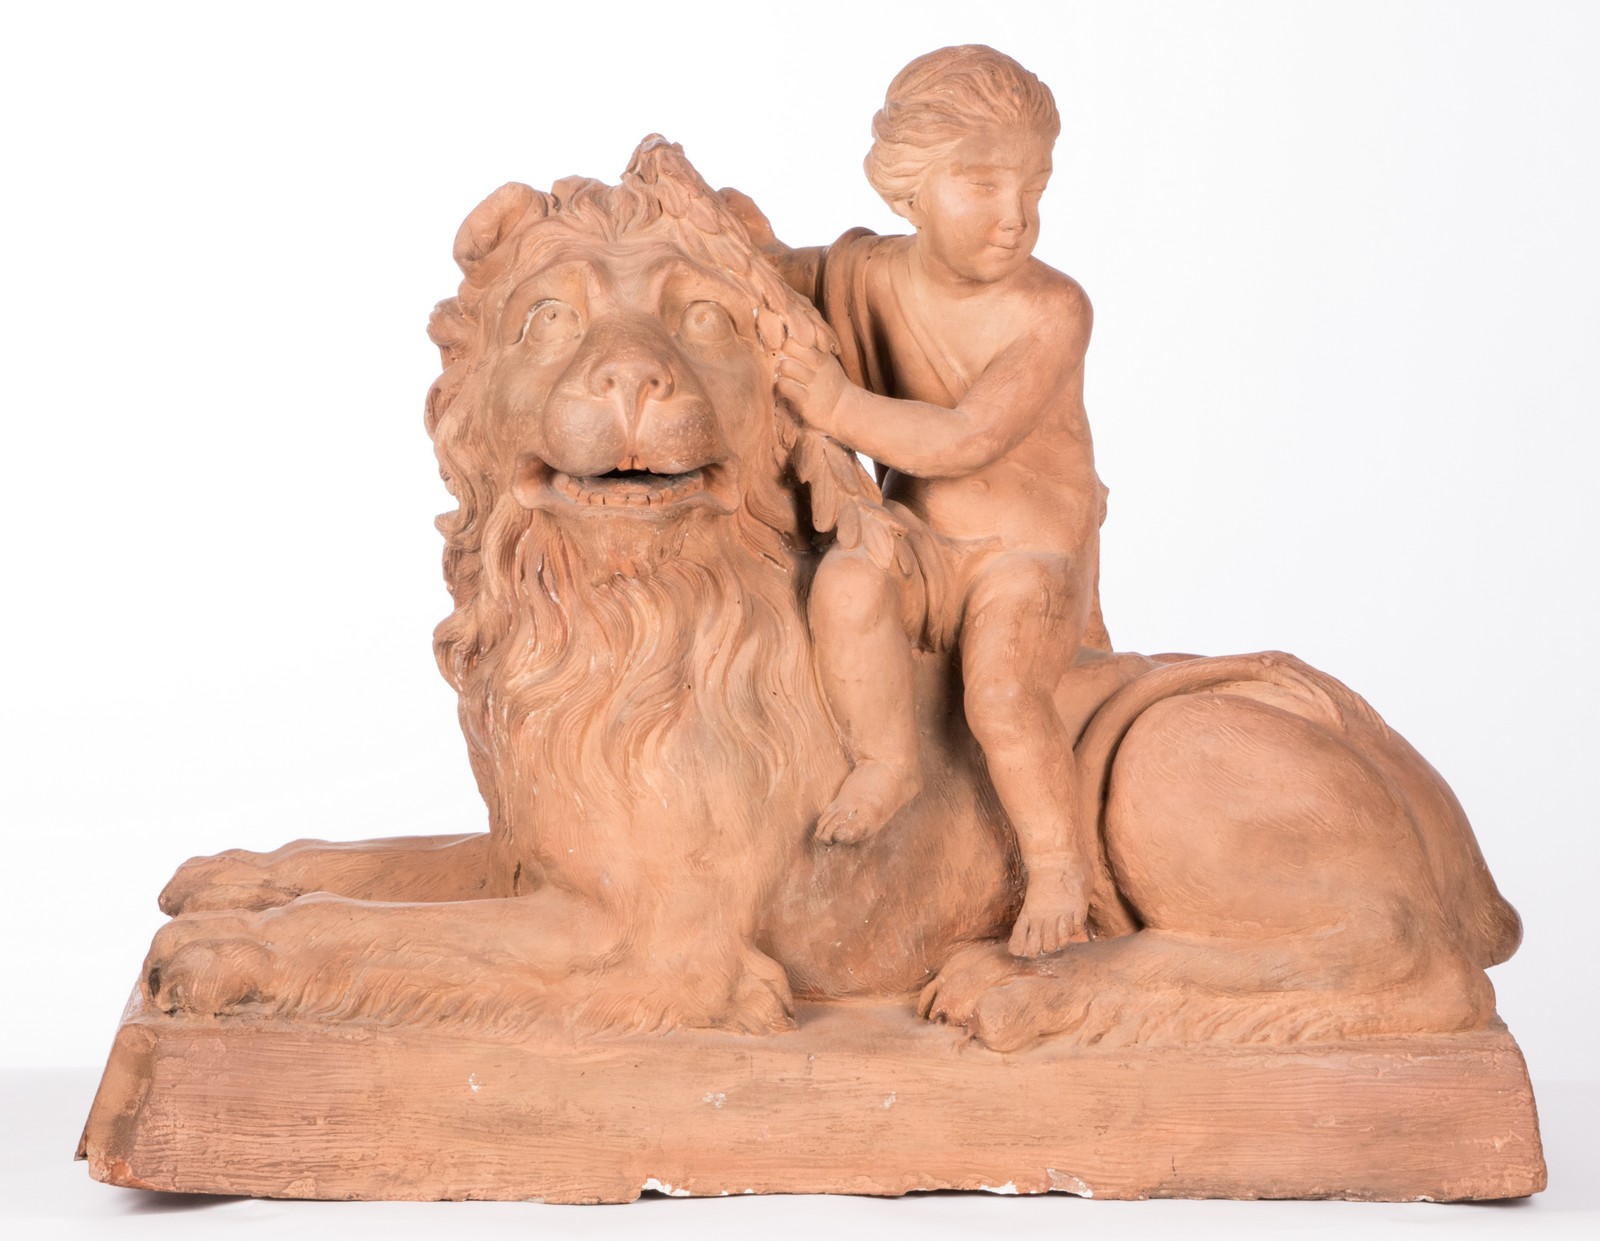 A large pair of terracotta sculptures depicting an allegoric scene, 19thC, H 78 - B 97 - D 35 cm - Image 4 of 62